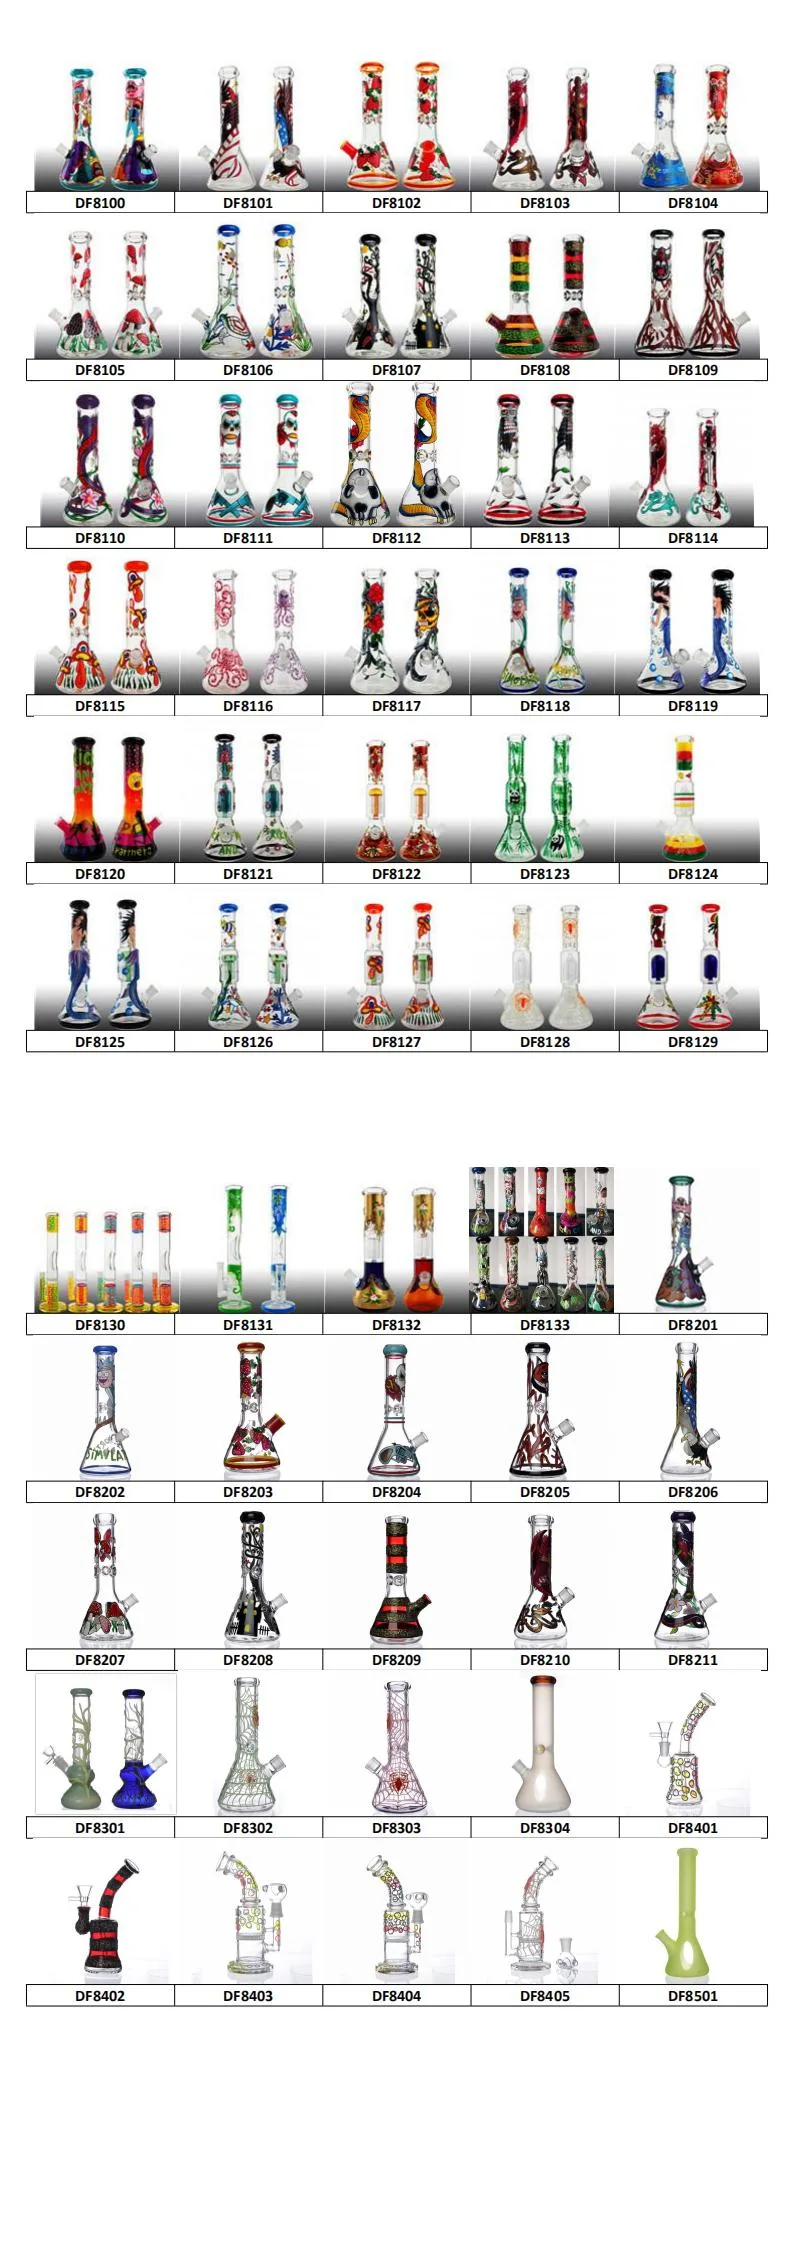 DF2029 Glass Hookah Hose Bottle Smoking Pipe Glass Bowl Water Pipes